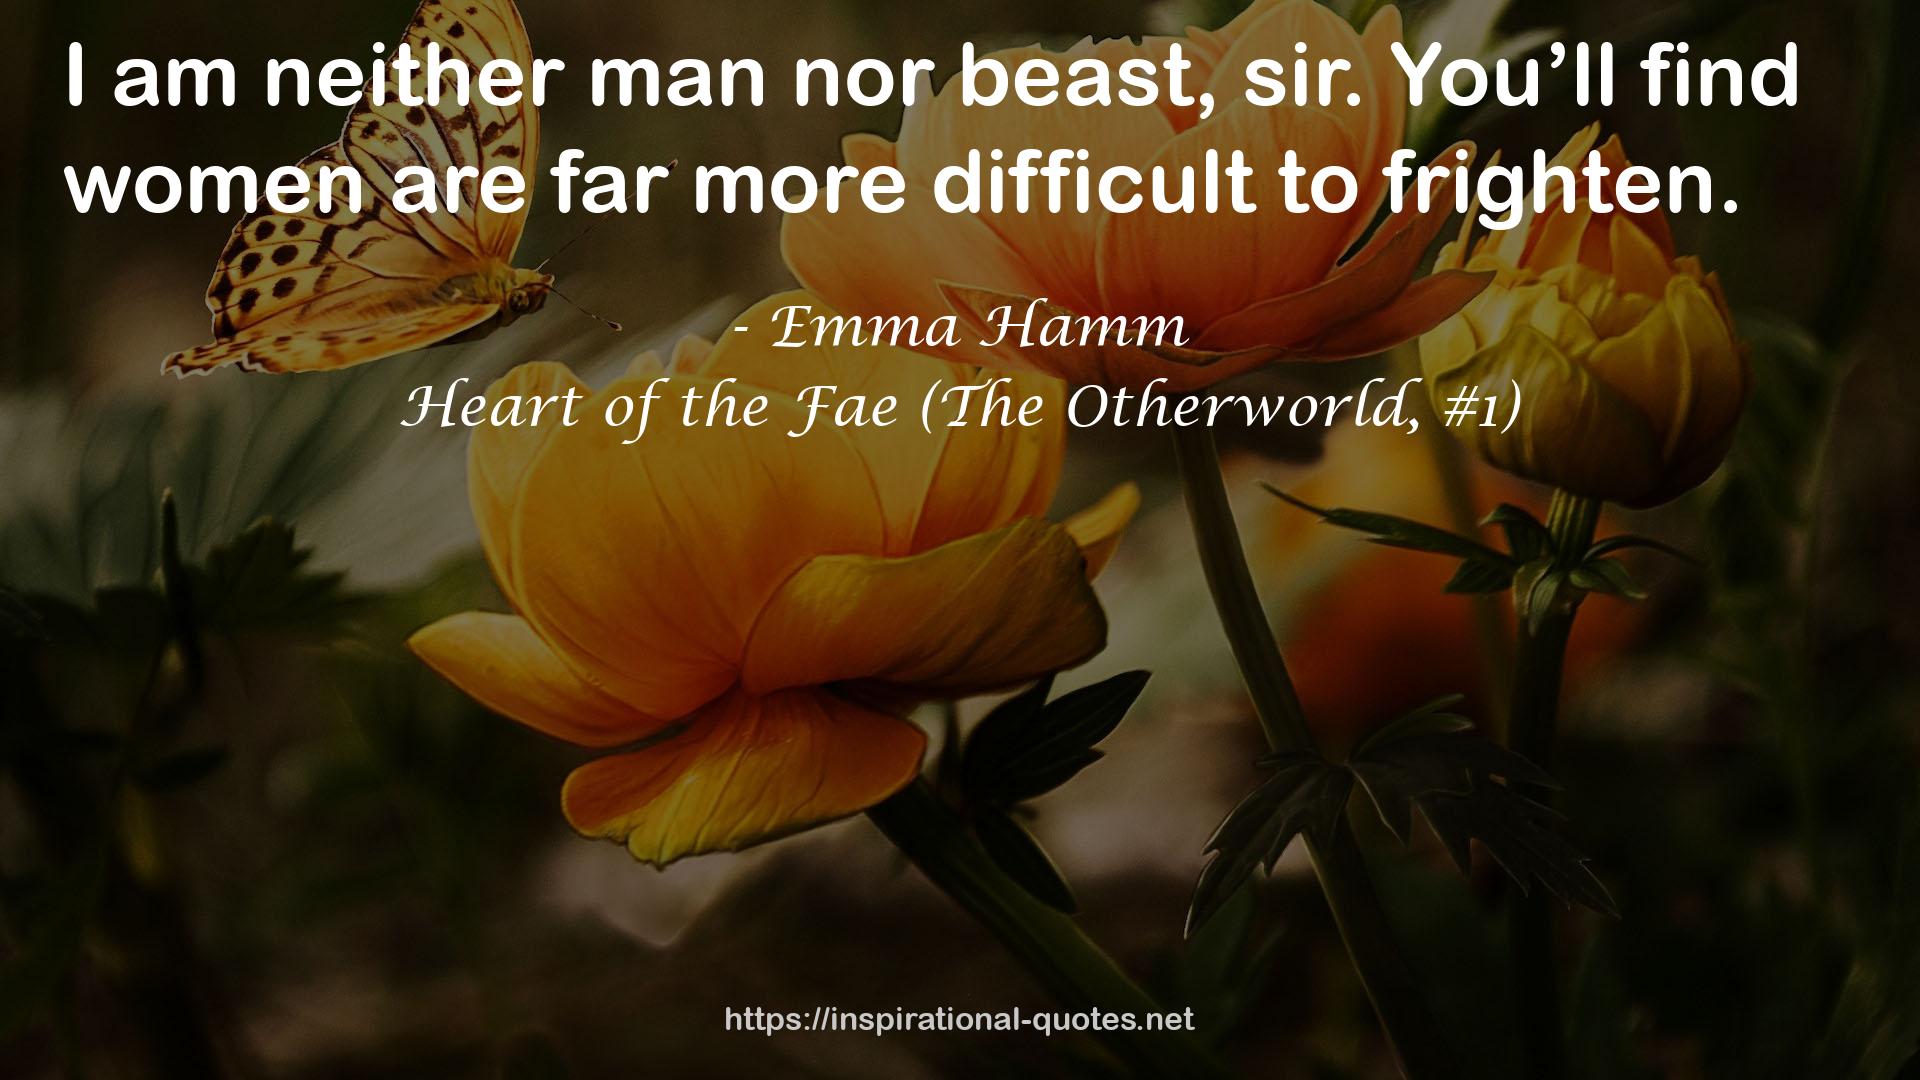 Heart of the Fae (The Otherworld, #1) QUOTES